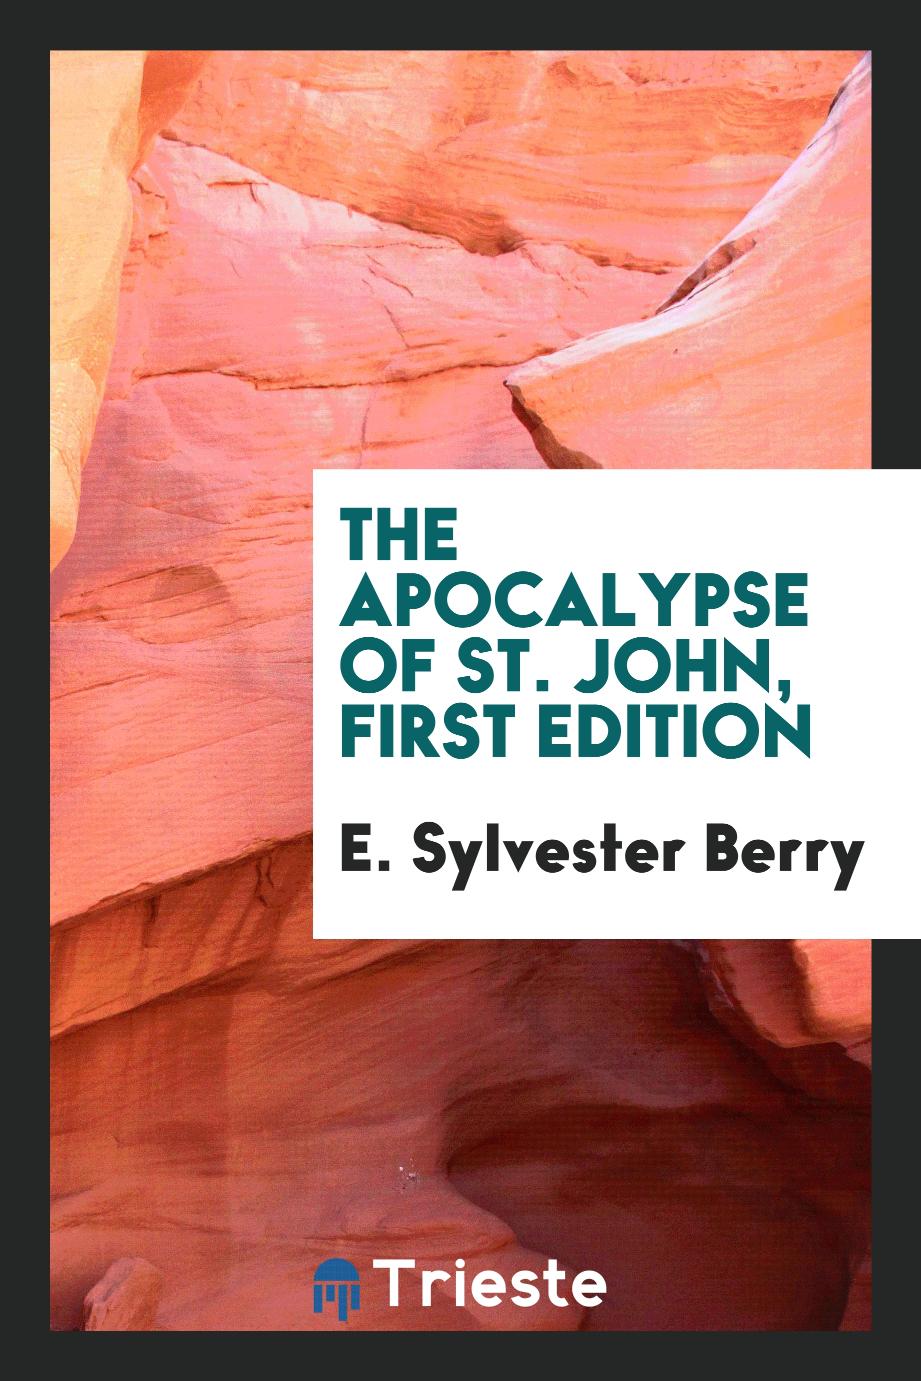 The Apocalypse of St. John, first edition